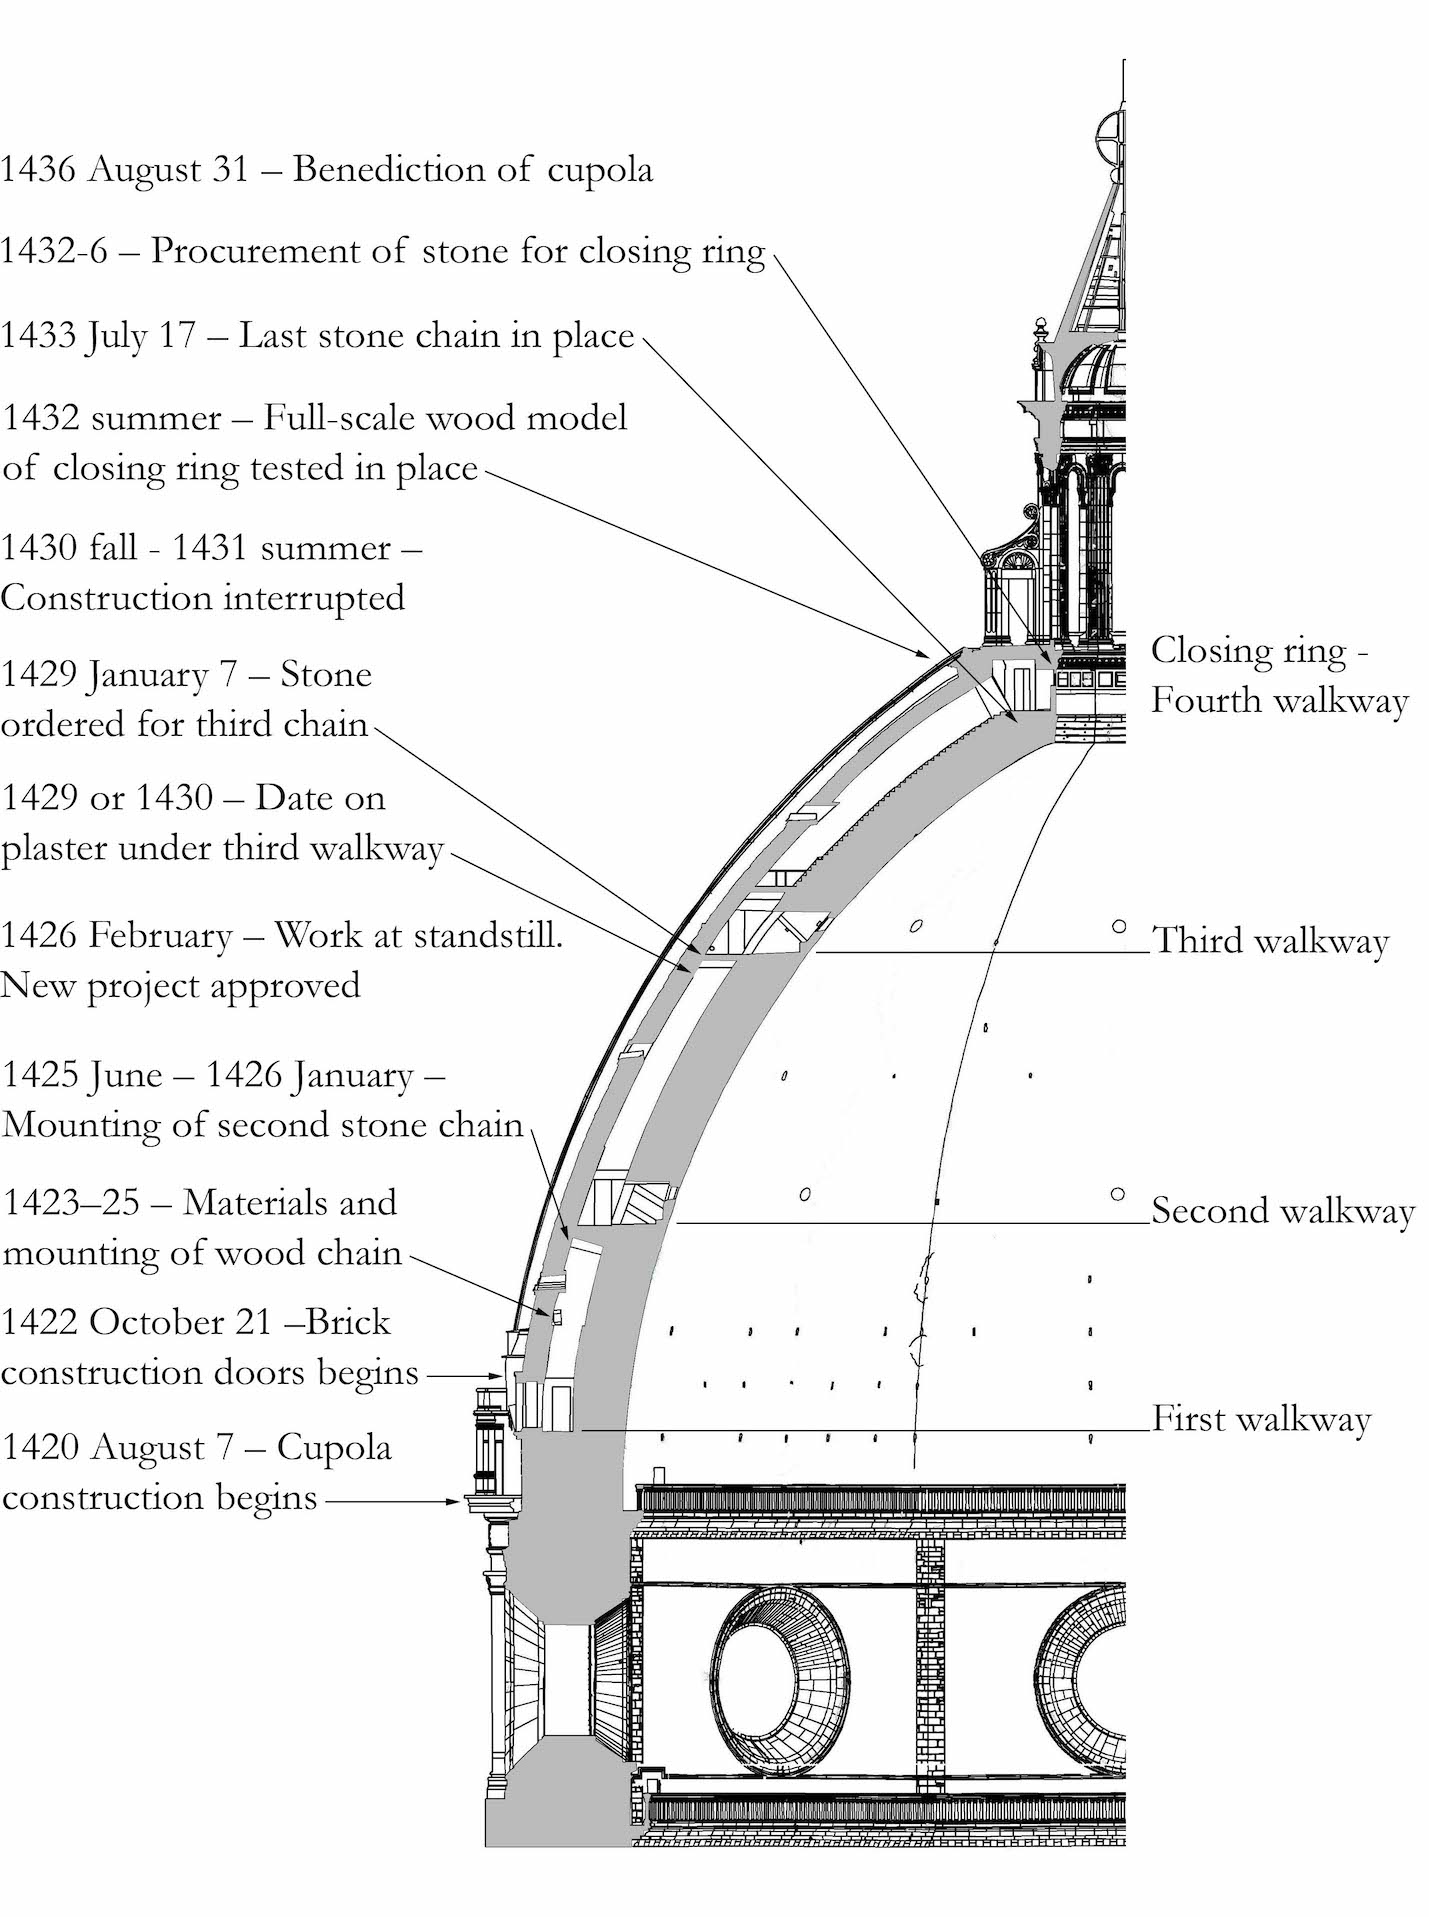 Cupola crosssection